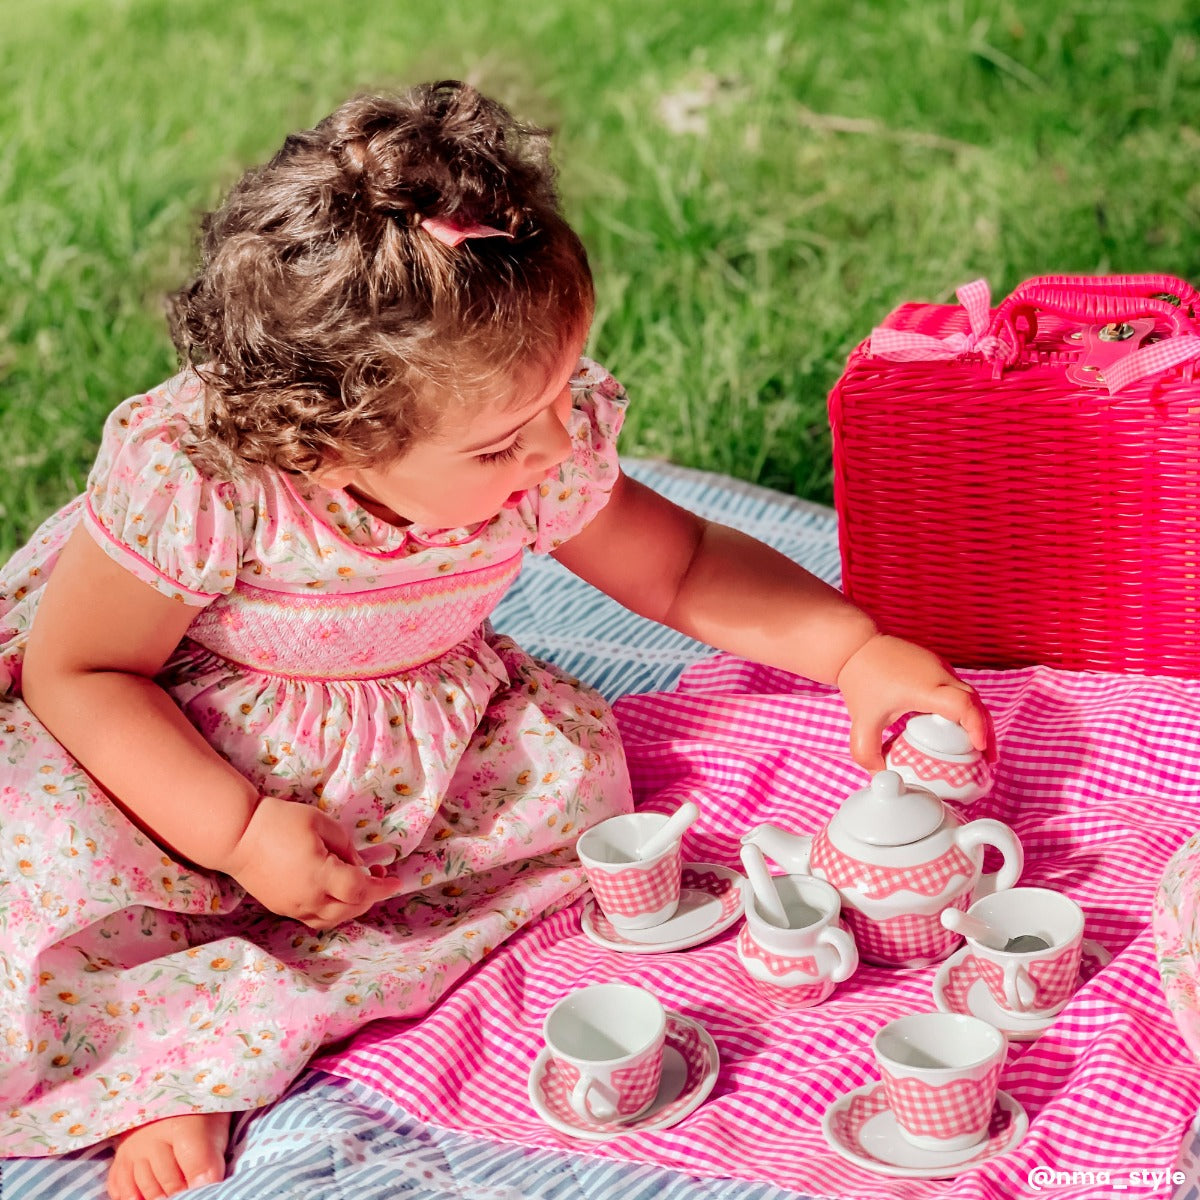 Picnic Tea Set, Host a luxurious tea party for your teddies and dolls with this delightful Tidlo Picnic Set. A traditional kids tea set, it features four porcelain plates, cups and spoons, a milk jug, teapot, a sugar pot, napkins and a small blanket. This brilliantly bright childrens tea set comes complete with a wicker-effect hamper that features a carry handle and lockable strap. It can be taken to the beach, park, garden and even abroad. The ideal travel companion. Toy tea sets are a great way to encoura